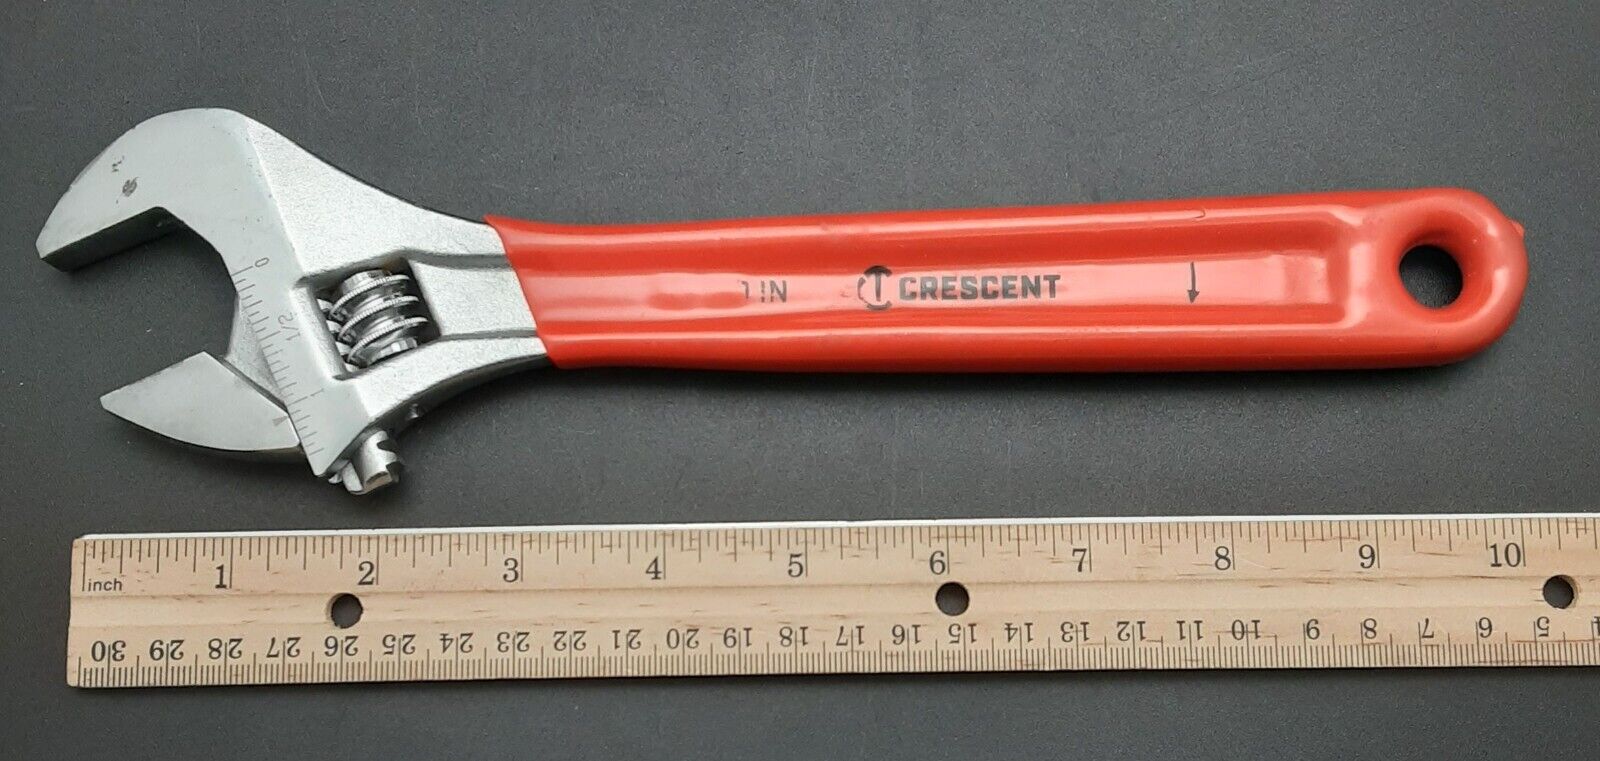 10” Red CRESCENT Adjustable Wrench; Made in USA